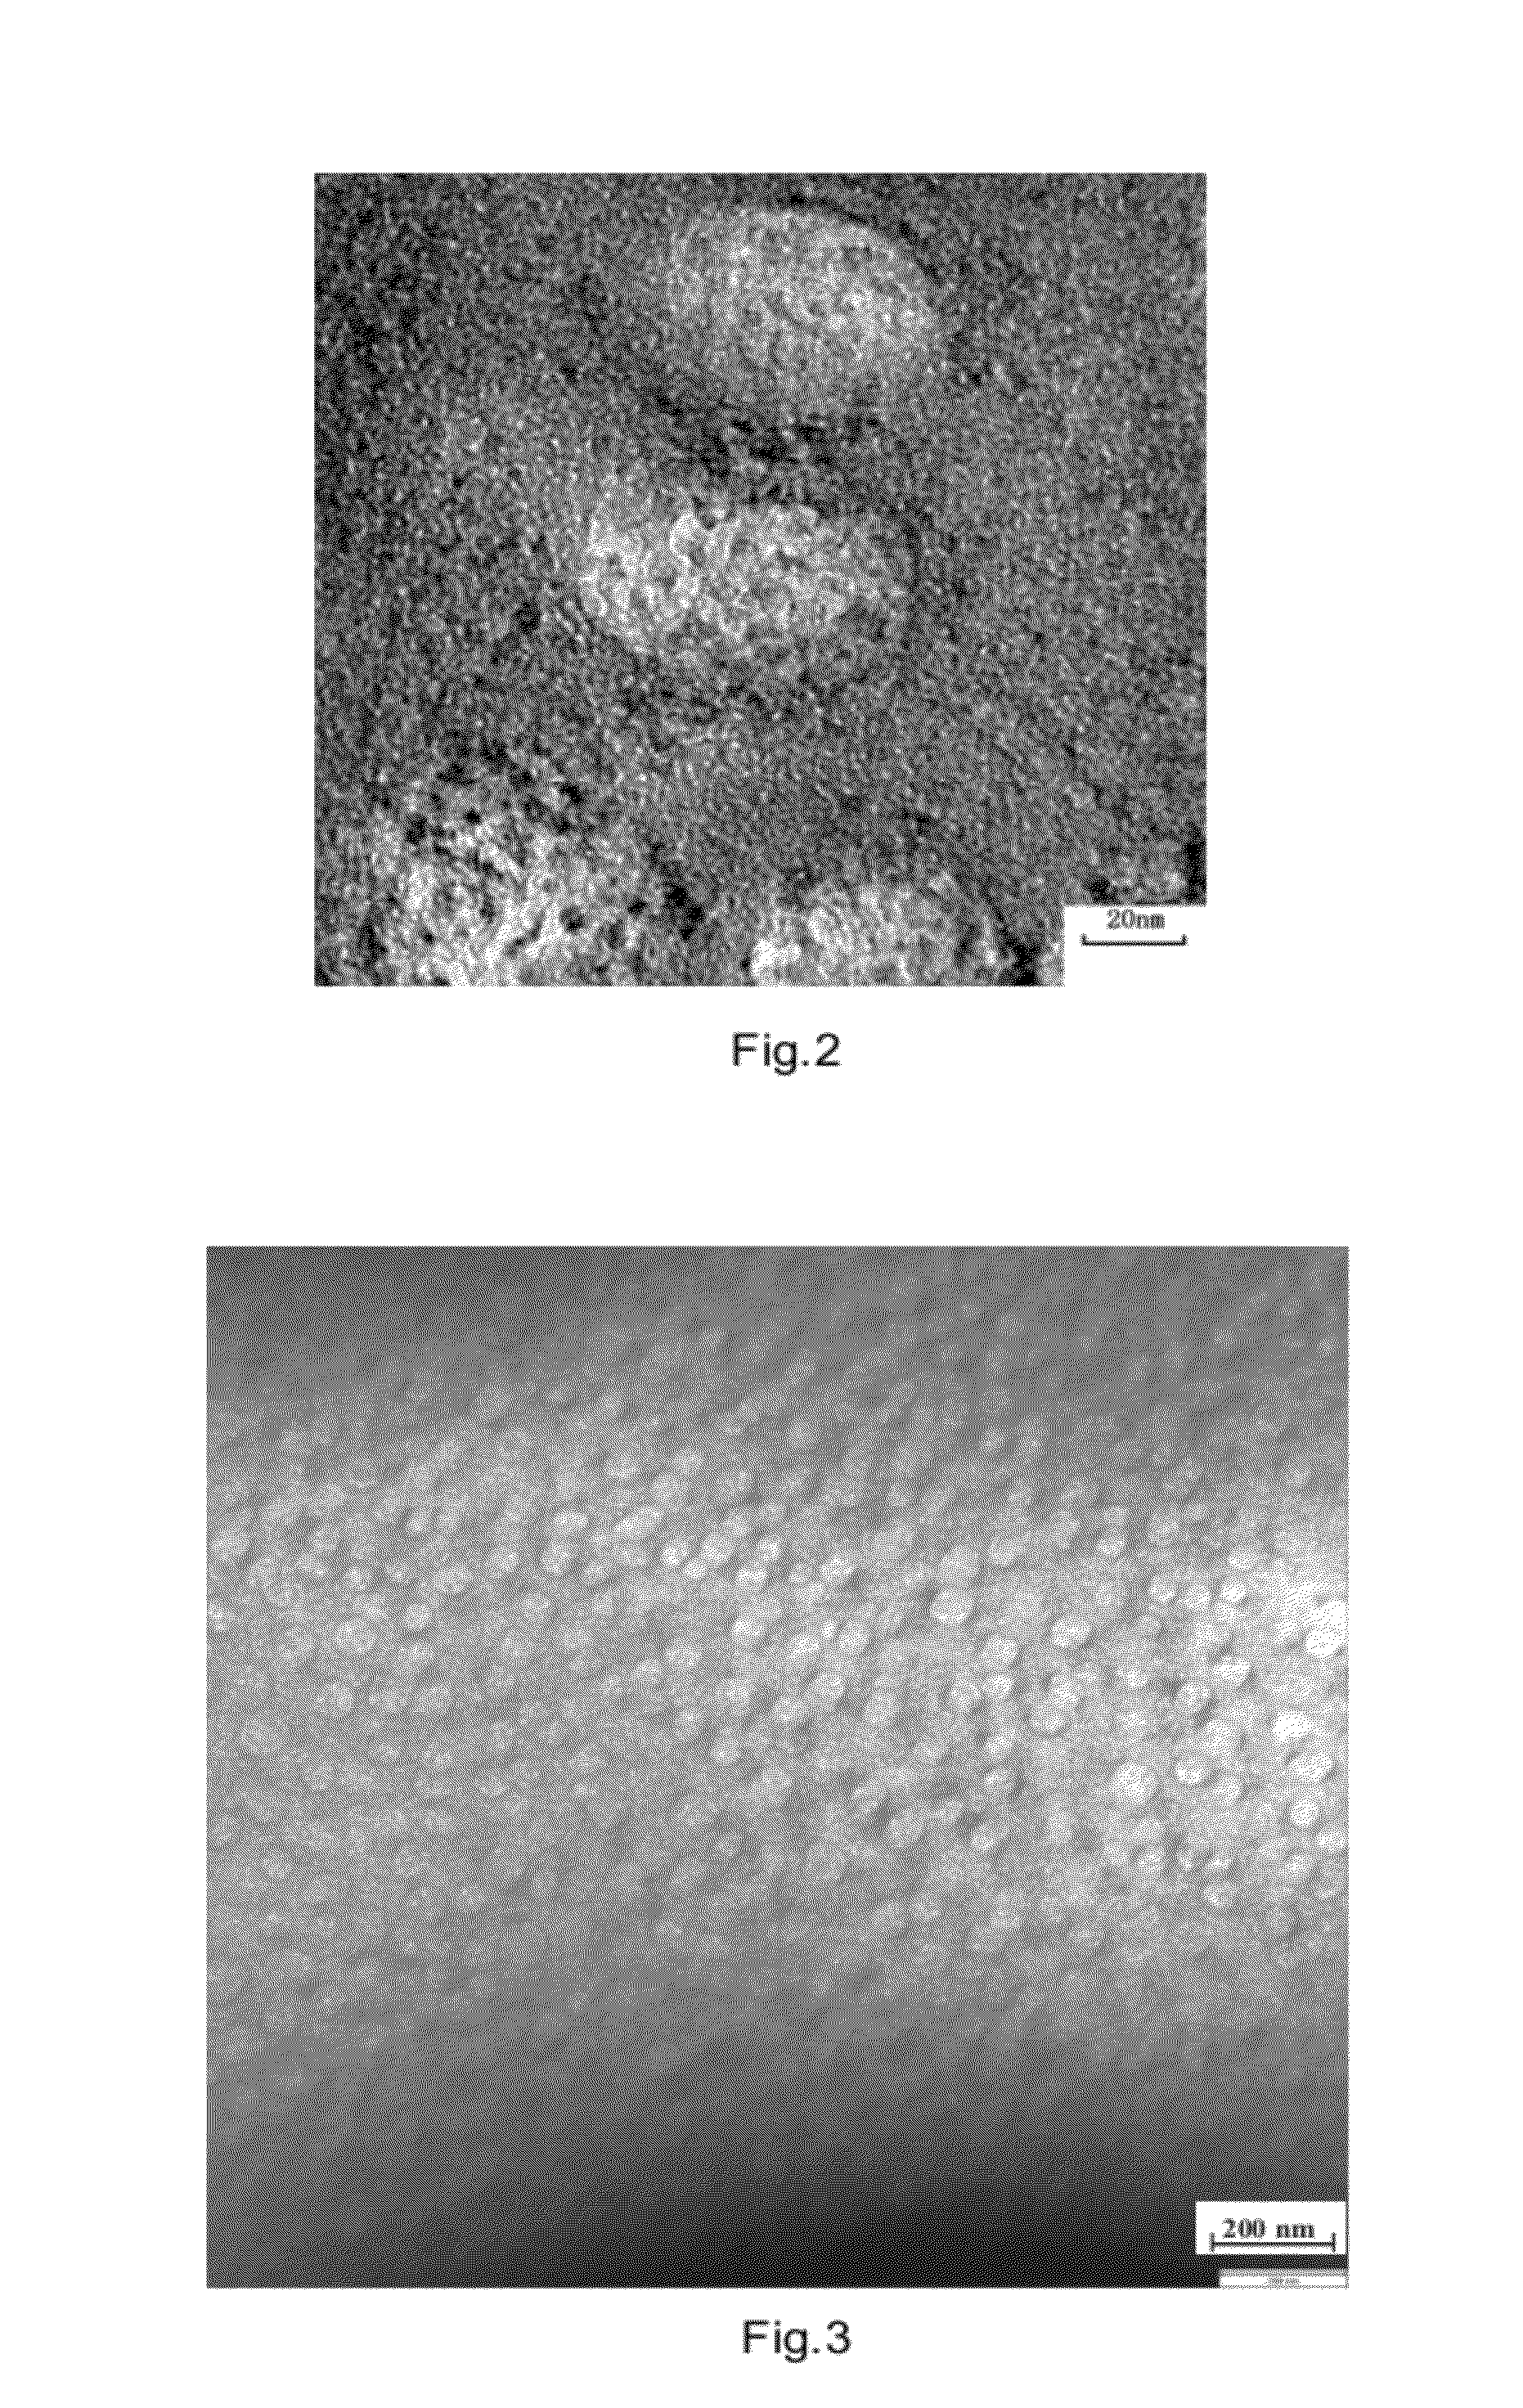 Method of in situ synthesis by thermite reaction with sol-gel and FeNiCrTi/NiAl-A12O3 nanocomposite materials prepared by the method